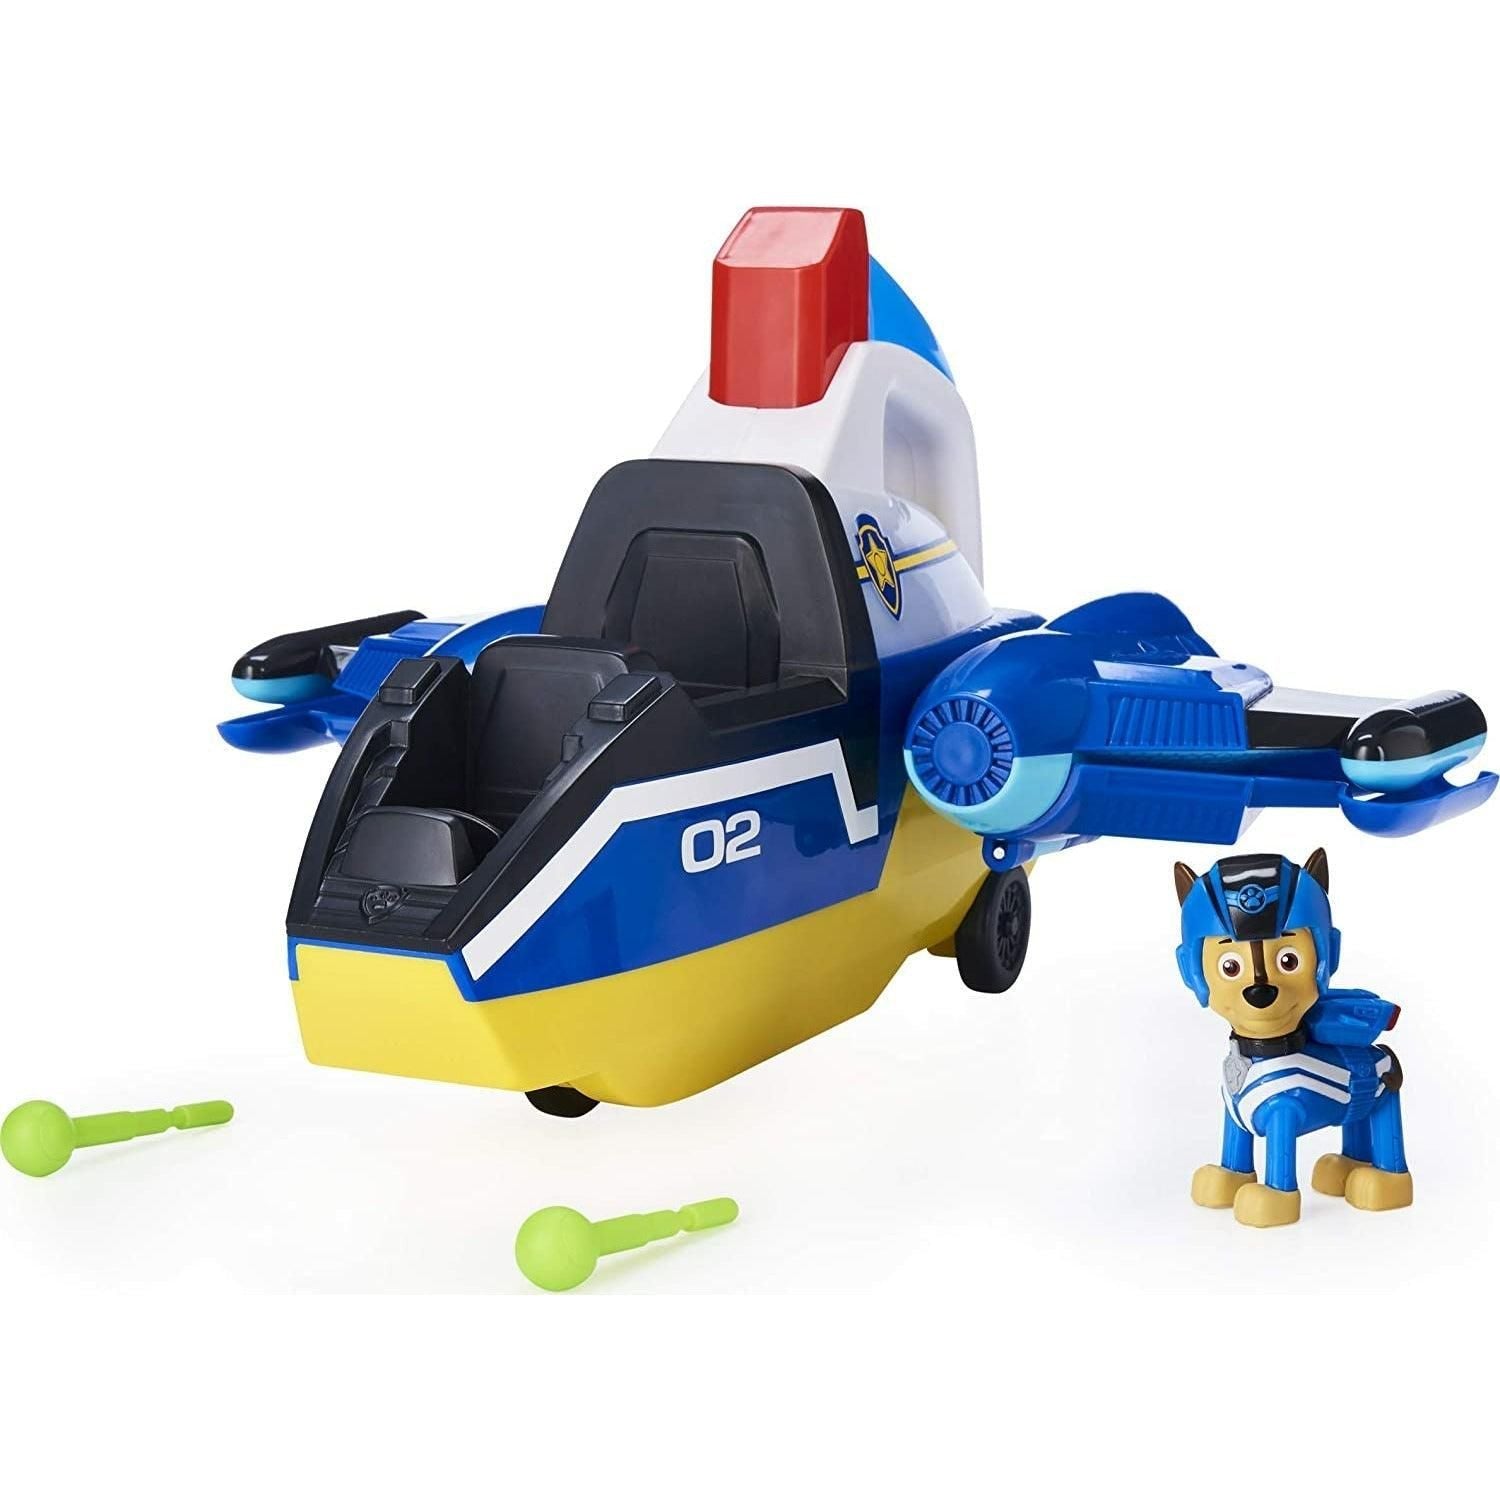 Paw Patrol, Jet to The Rescue Deluxe Transforming Spiral Rescue Jet with Lights and Sounds - BumbleToys - 2-4 Years, 5-7 Years, Action Battling, Boys, OXE, Paw Patrol, Pre-Order